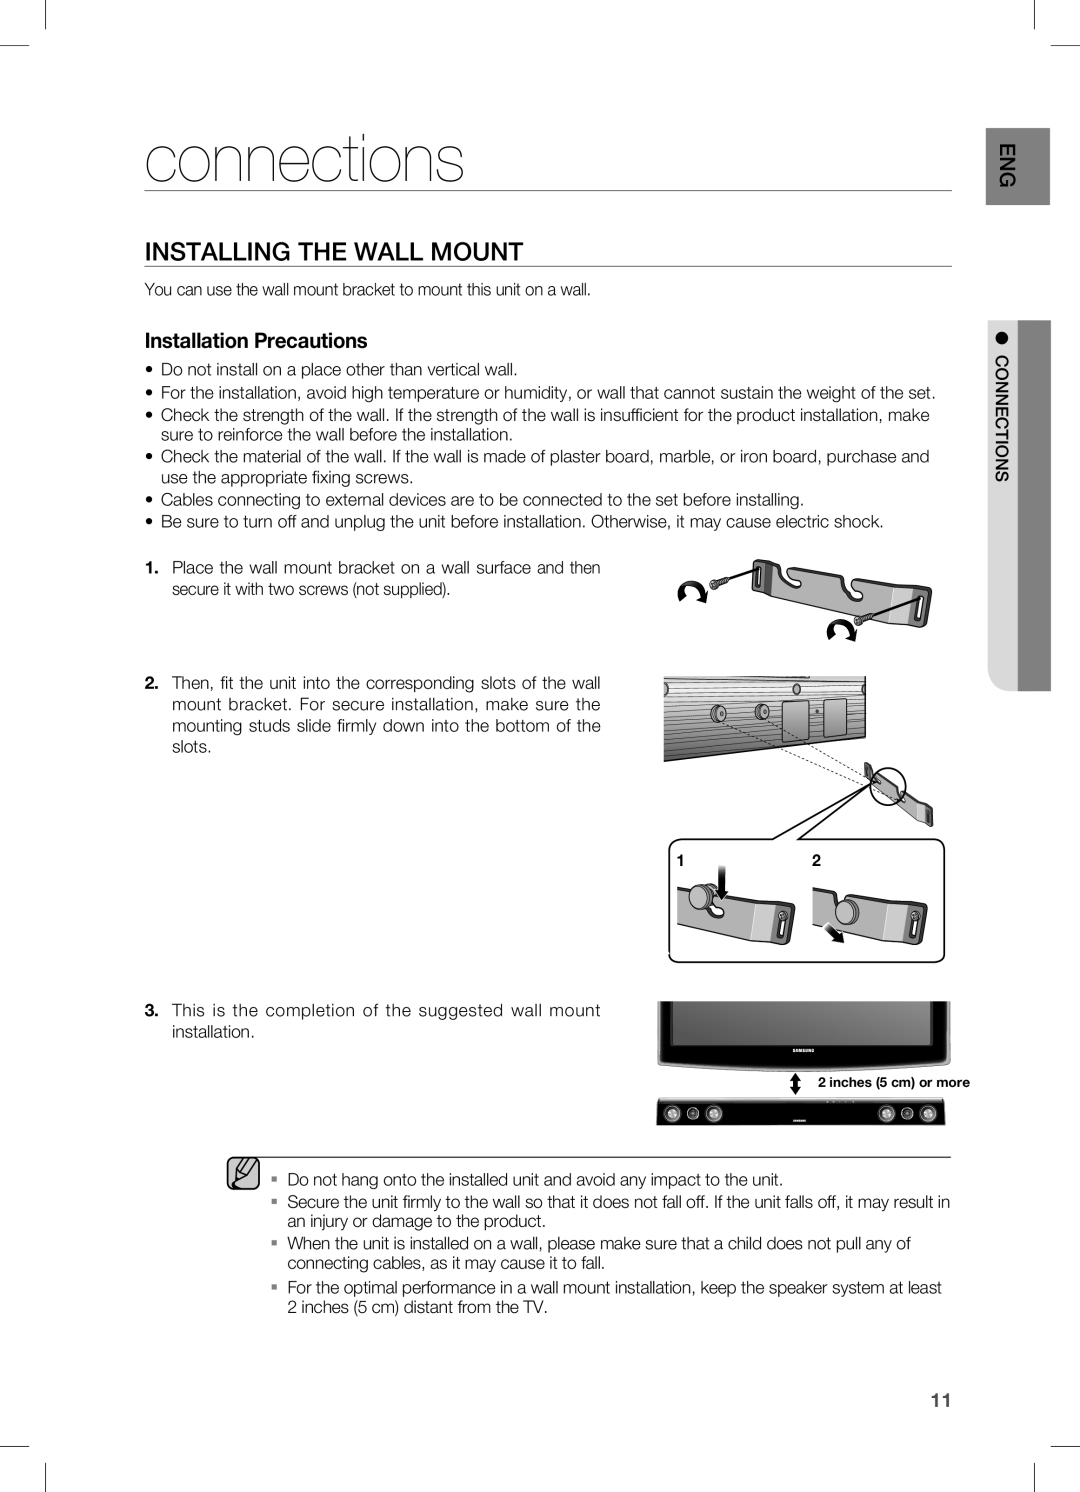 Samsung AH68-02273S, HW-C451, HW-C450 user manual connections, INSTAllING THE WAll MOUNT, Installation Precautions 